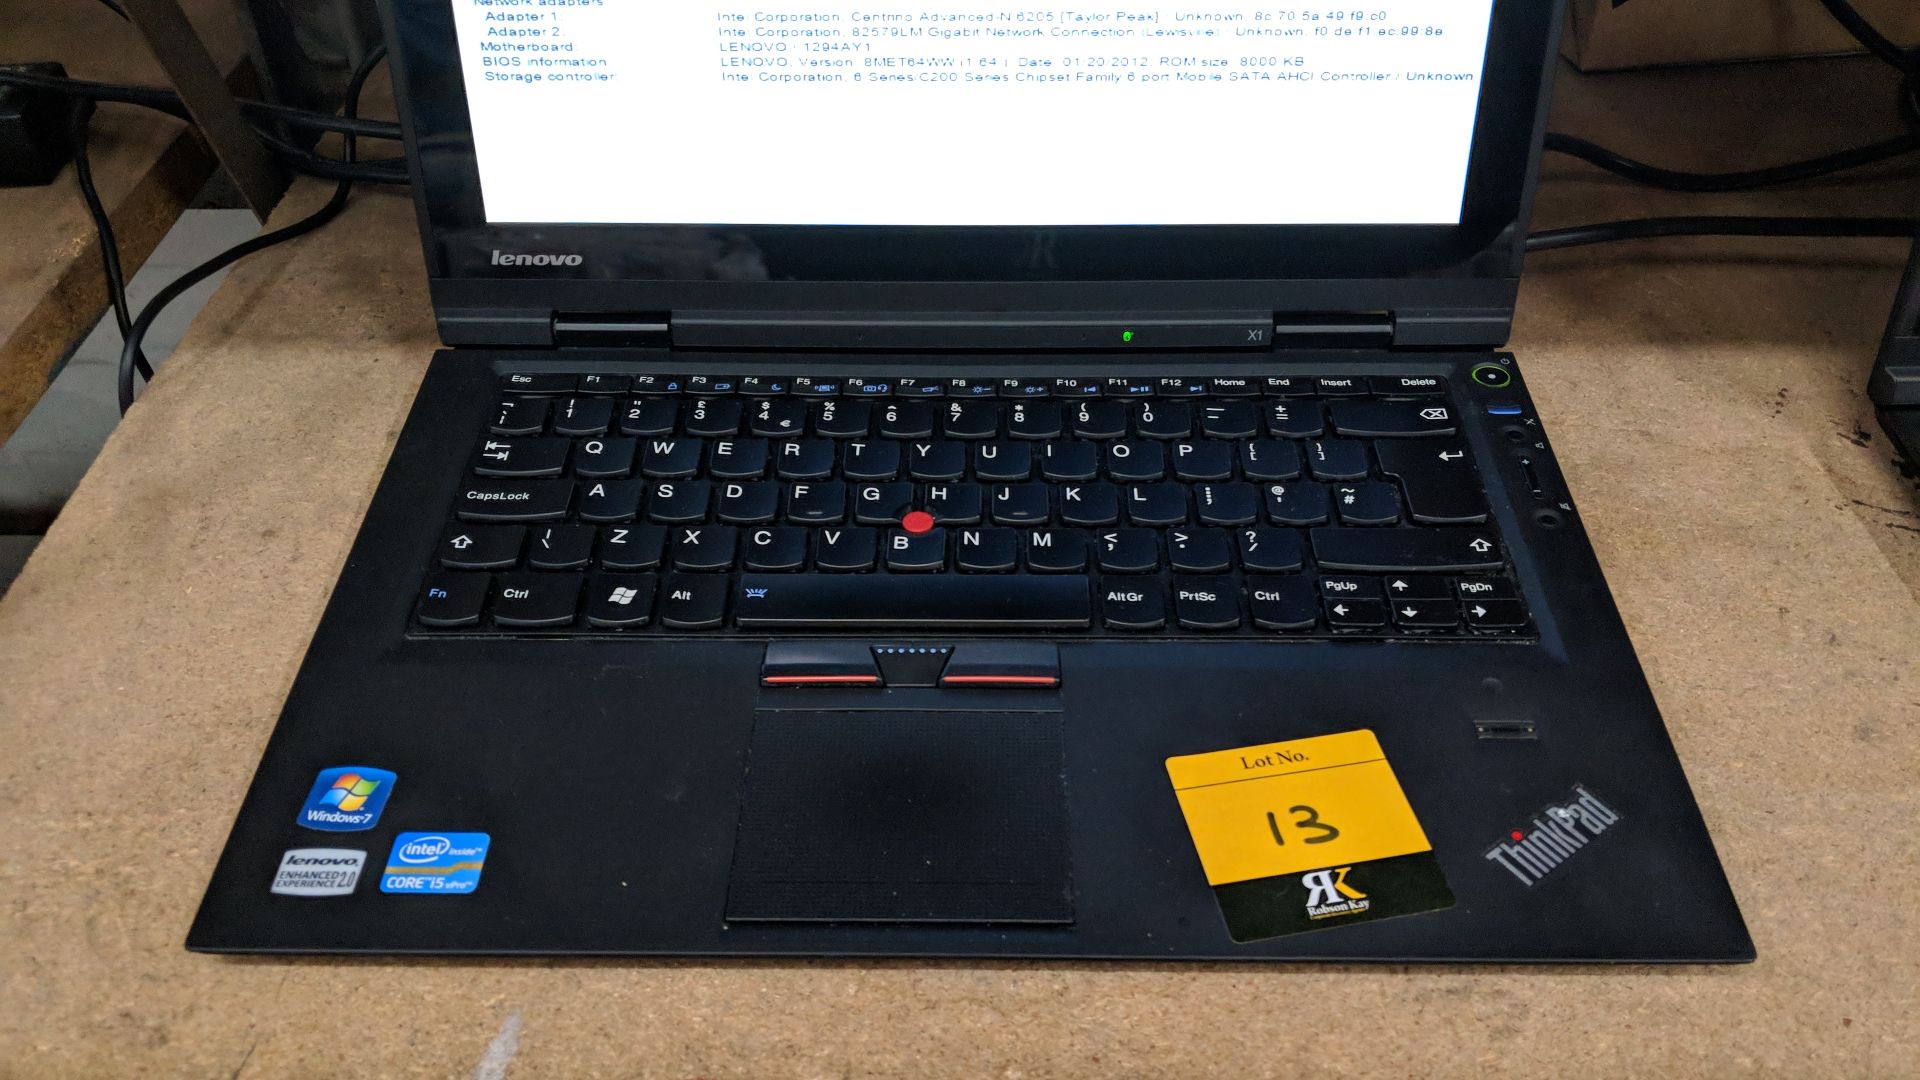 Lenovo ThinkPad X1 notebook computer, model 1294AY1 with built-in webcam. Intel Core i5-2520M CPU@ - Image 3 of 8